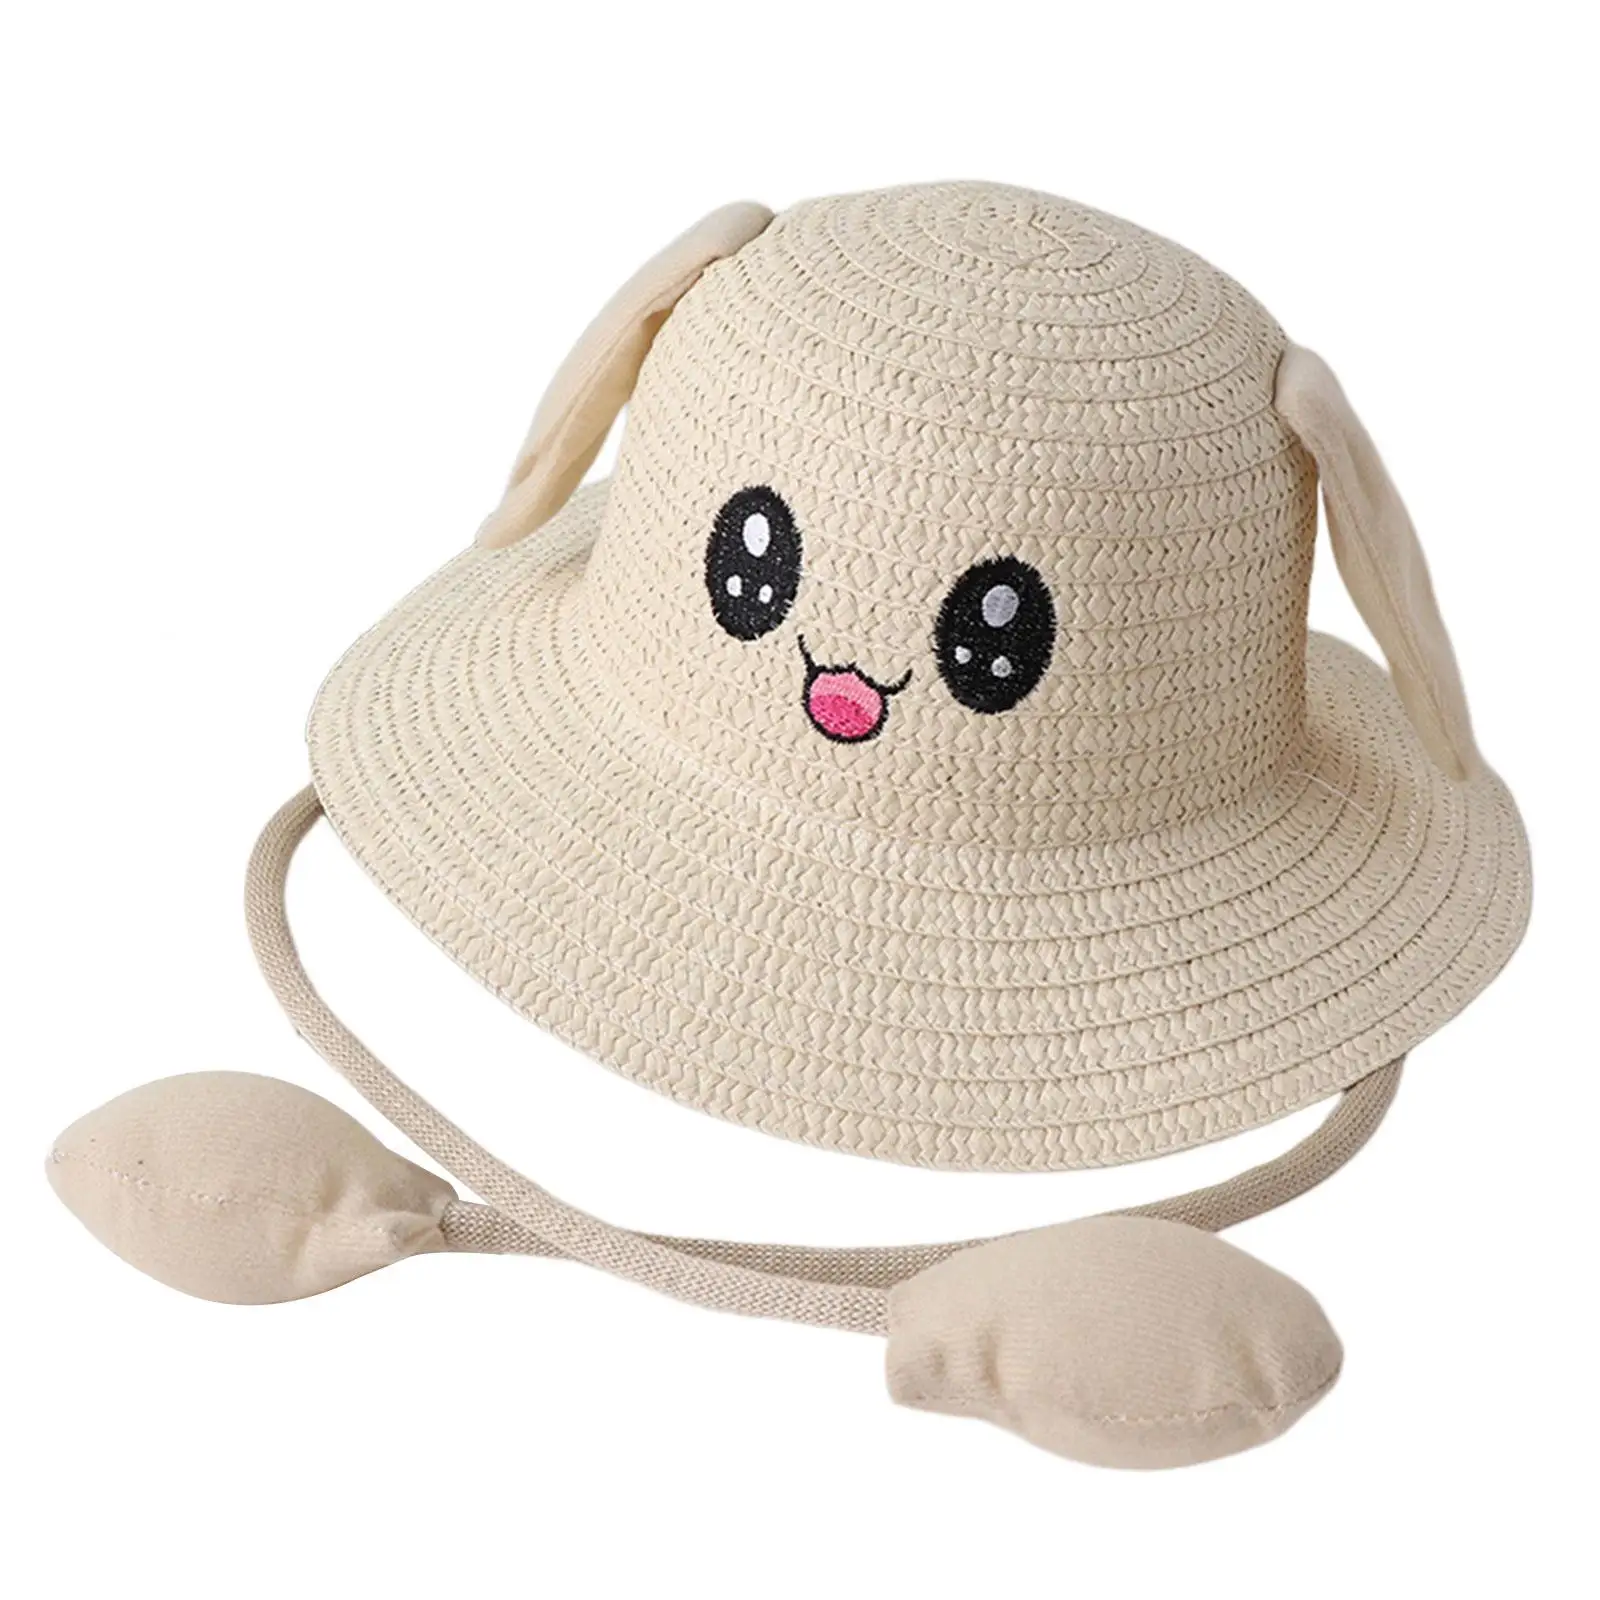 

Bunny Straw Hat Caps with Ears Moving Jumping Pop up Comfortable Cute Sunscreen Sun Hat for Outdoor Holidays Spring Parties Gift